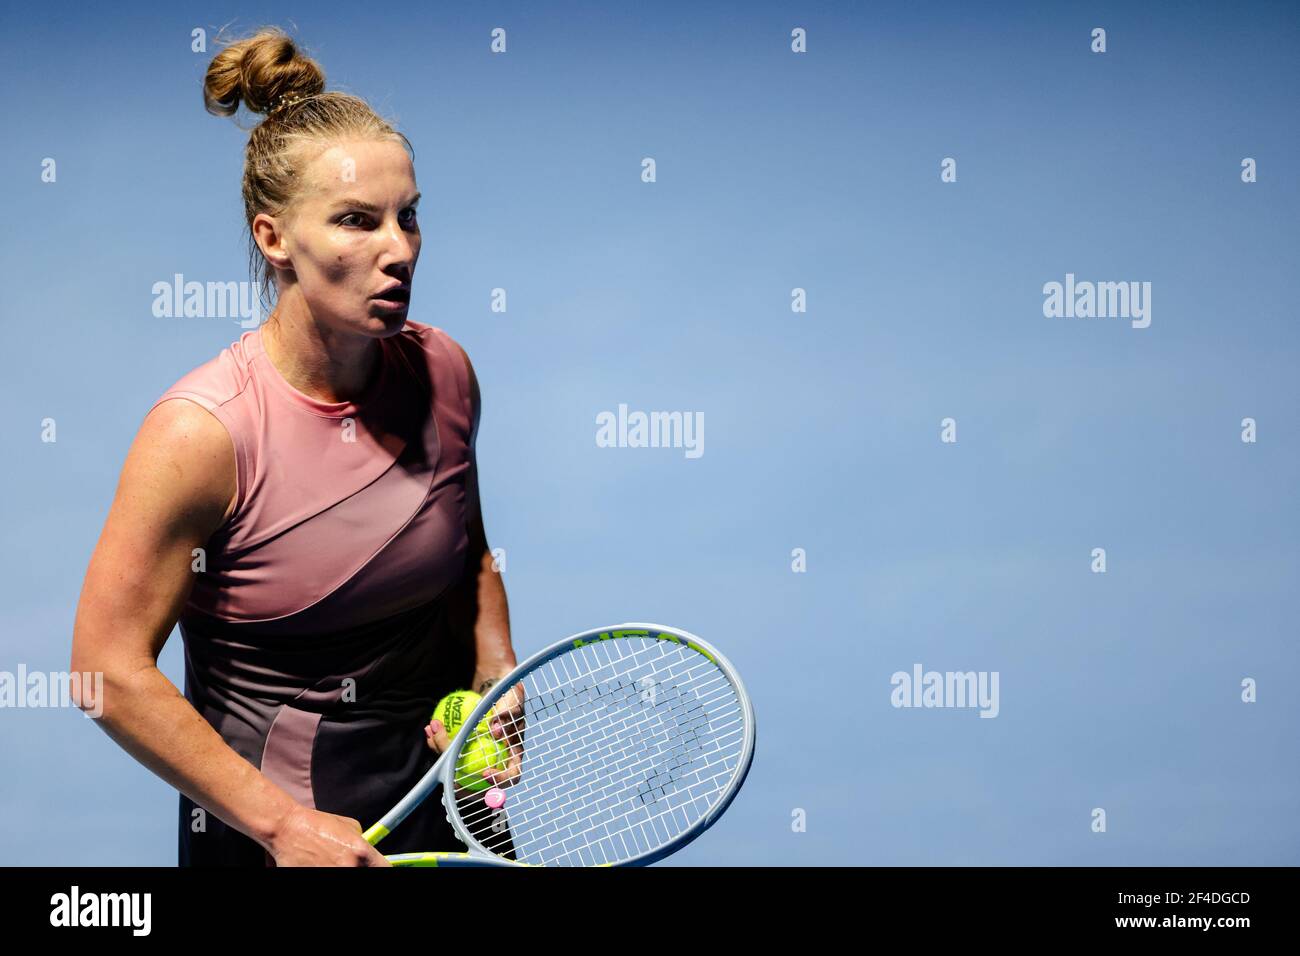 ST PETERSBURG, RUSSIA - MARCH 20: Svetlana Kuznetsova of Russia during her match against Daria Kasatkina of Russia during the semifinals of the 2021 St Petersburg Ladies Trophy, WTA 500 tennis tournament at Sibur Arena on March 20, 2021 in St Petersburg, Russia (Photo by Anatolij Medved/Orange Pictures)*** Local Caption *** Svetlana Kuznetsova Stock Photo